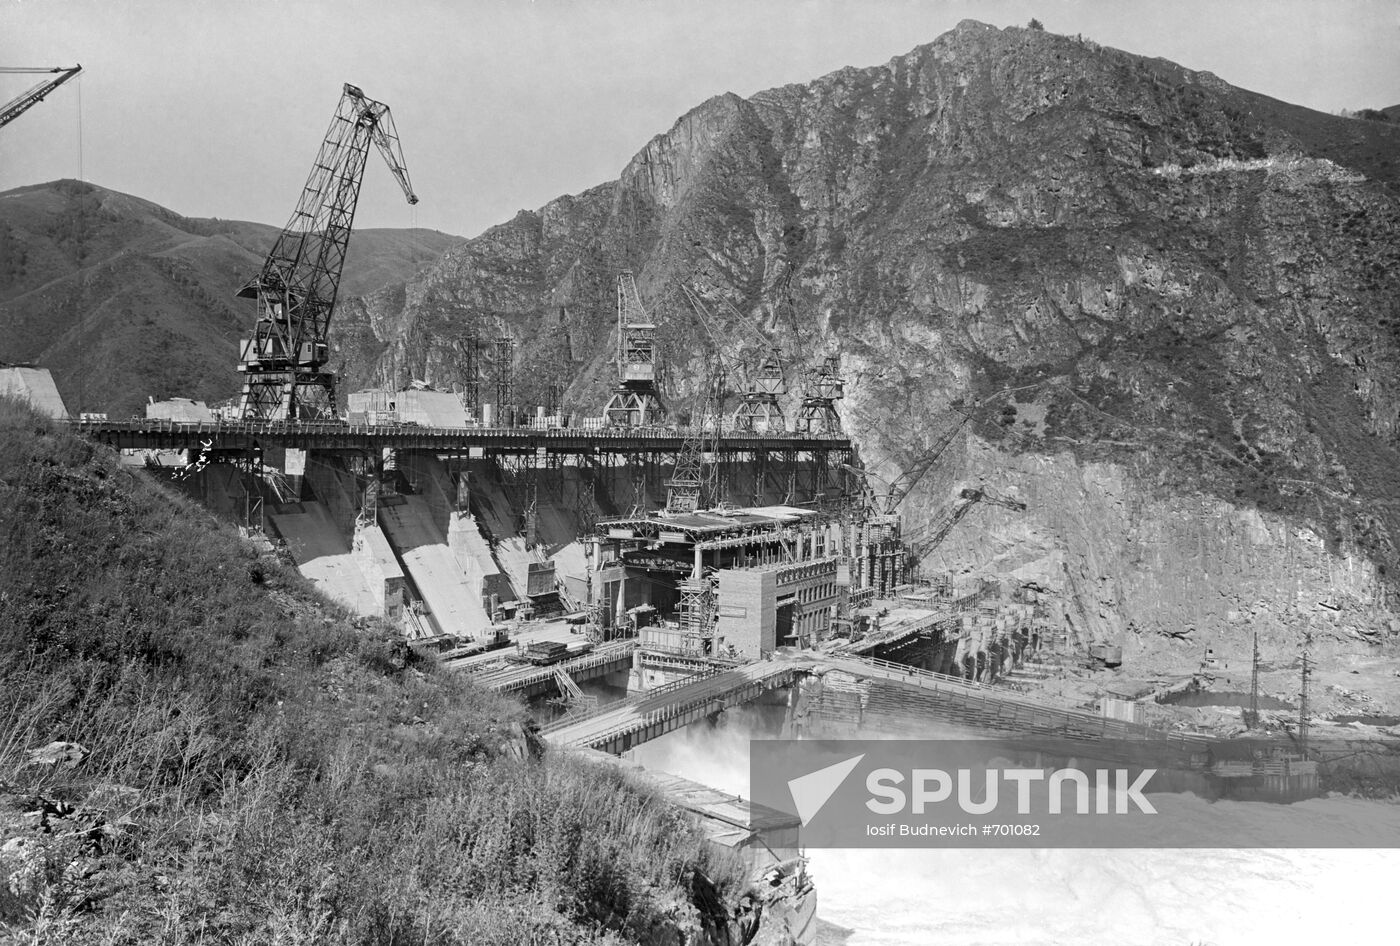 Building of Bukhtarminsk hydroelectric power station